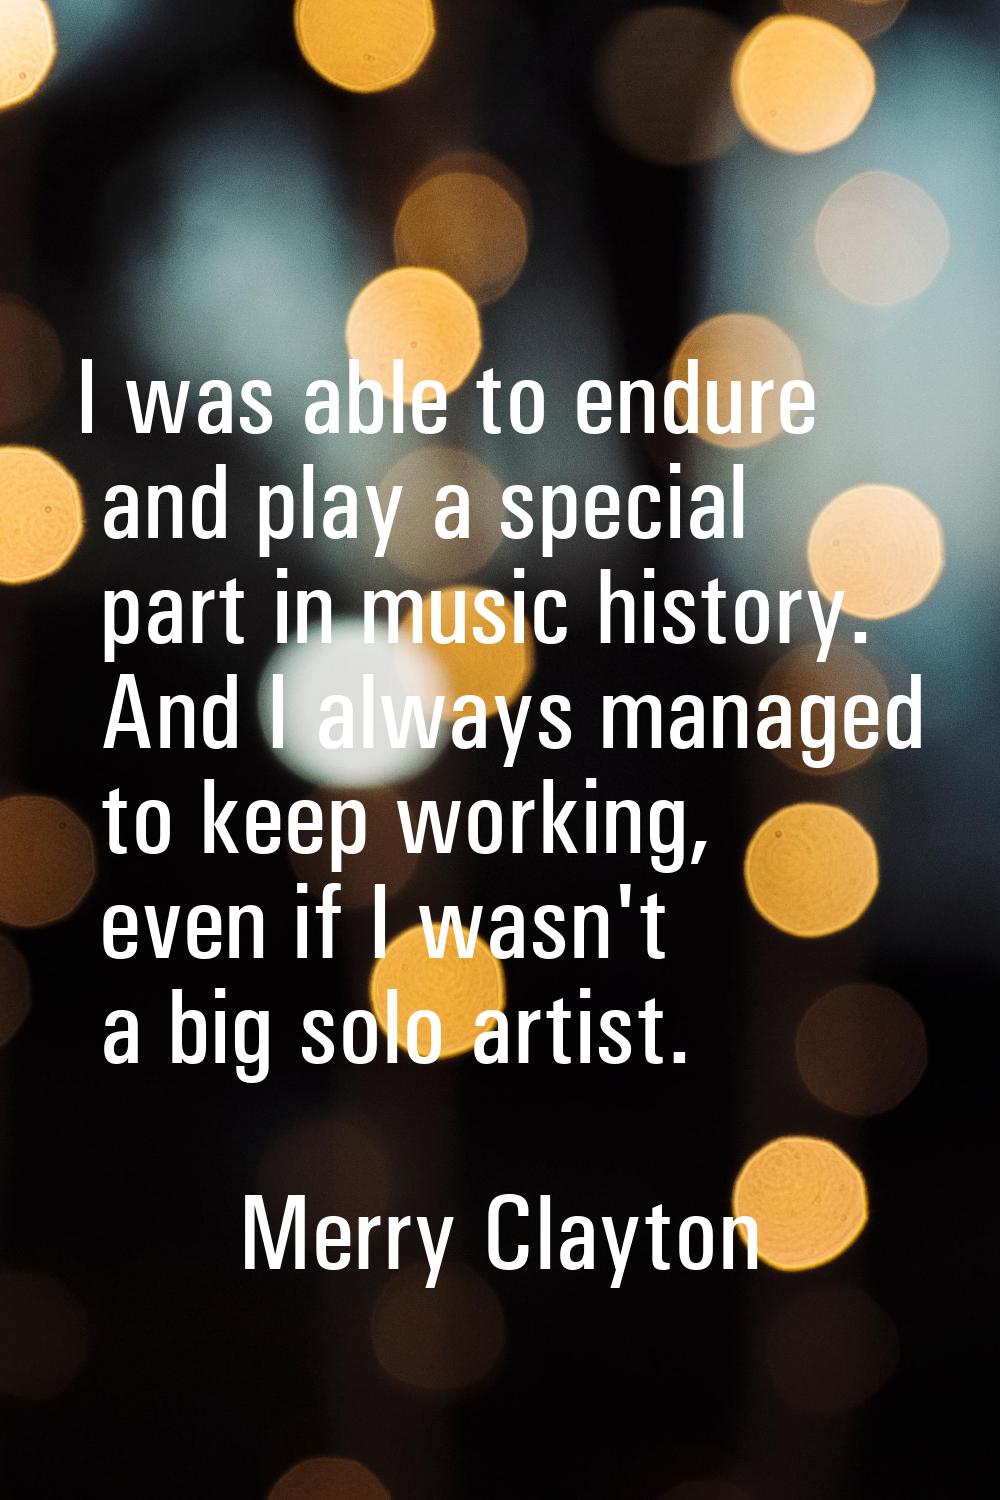 I was able to endure and play a special part in music history. And I always managed to keep working